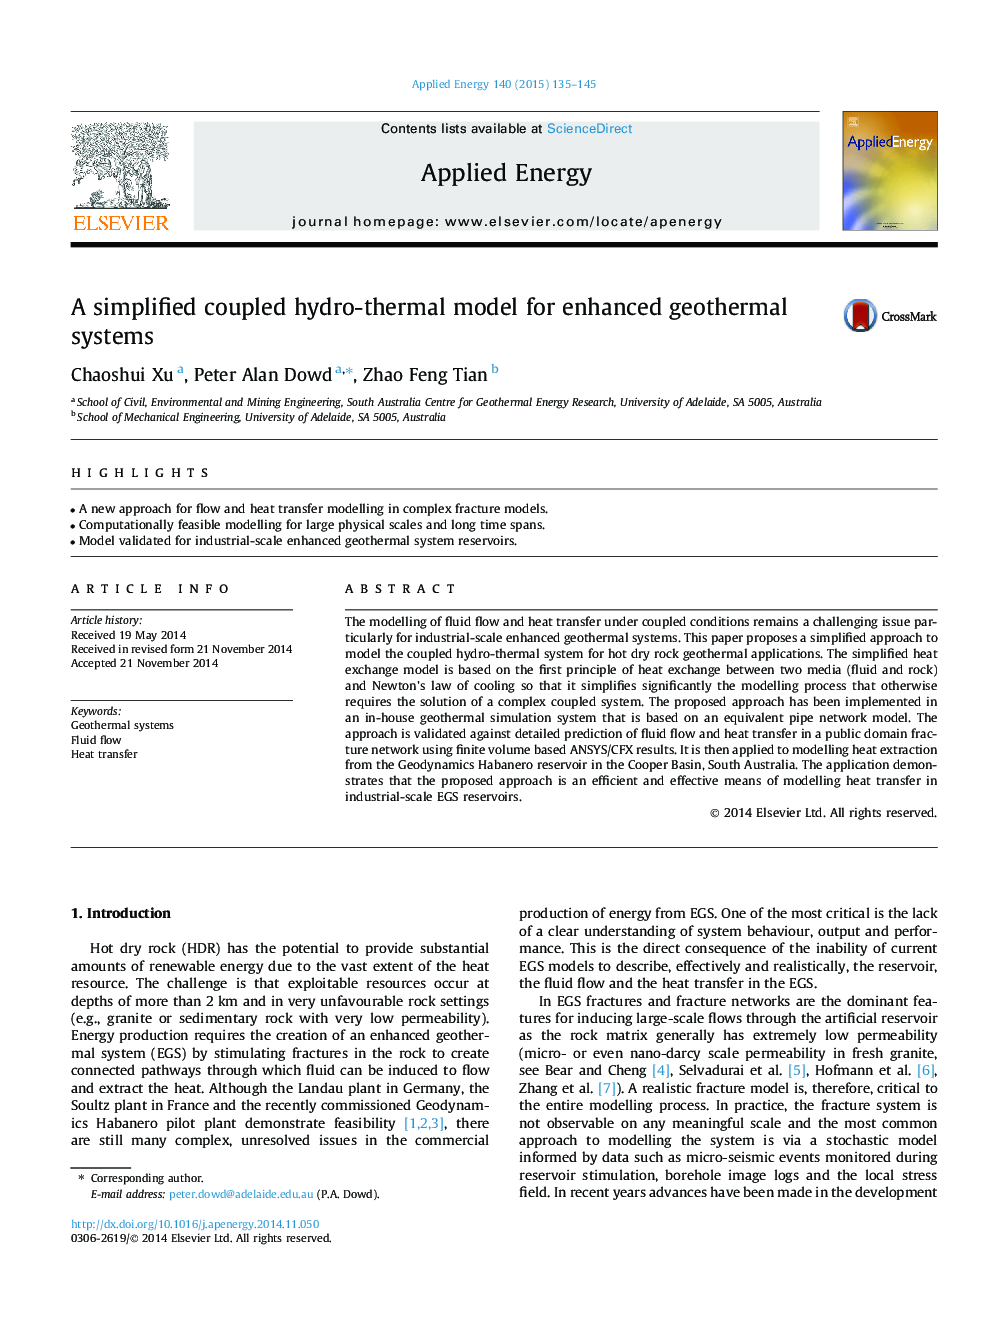 A simplified coupled hydro-thermal model for enhanced geothermal systems